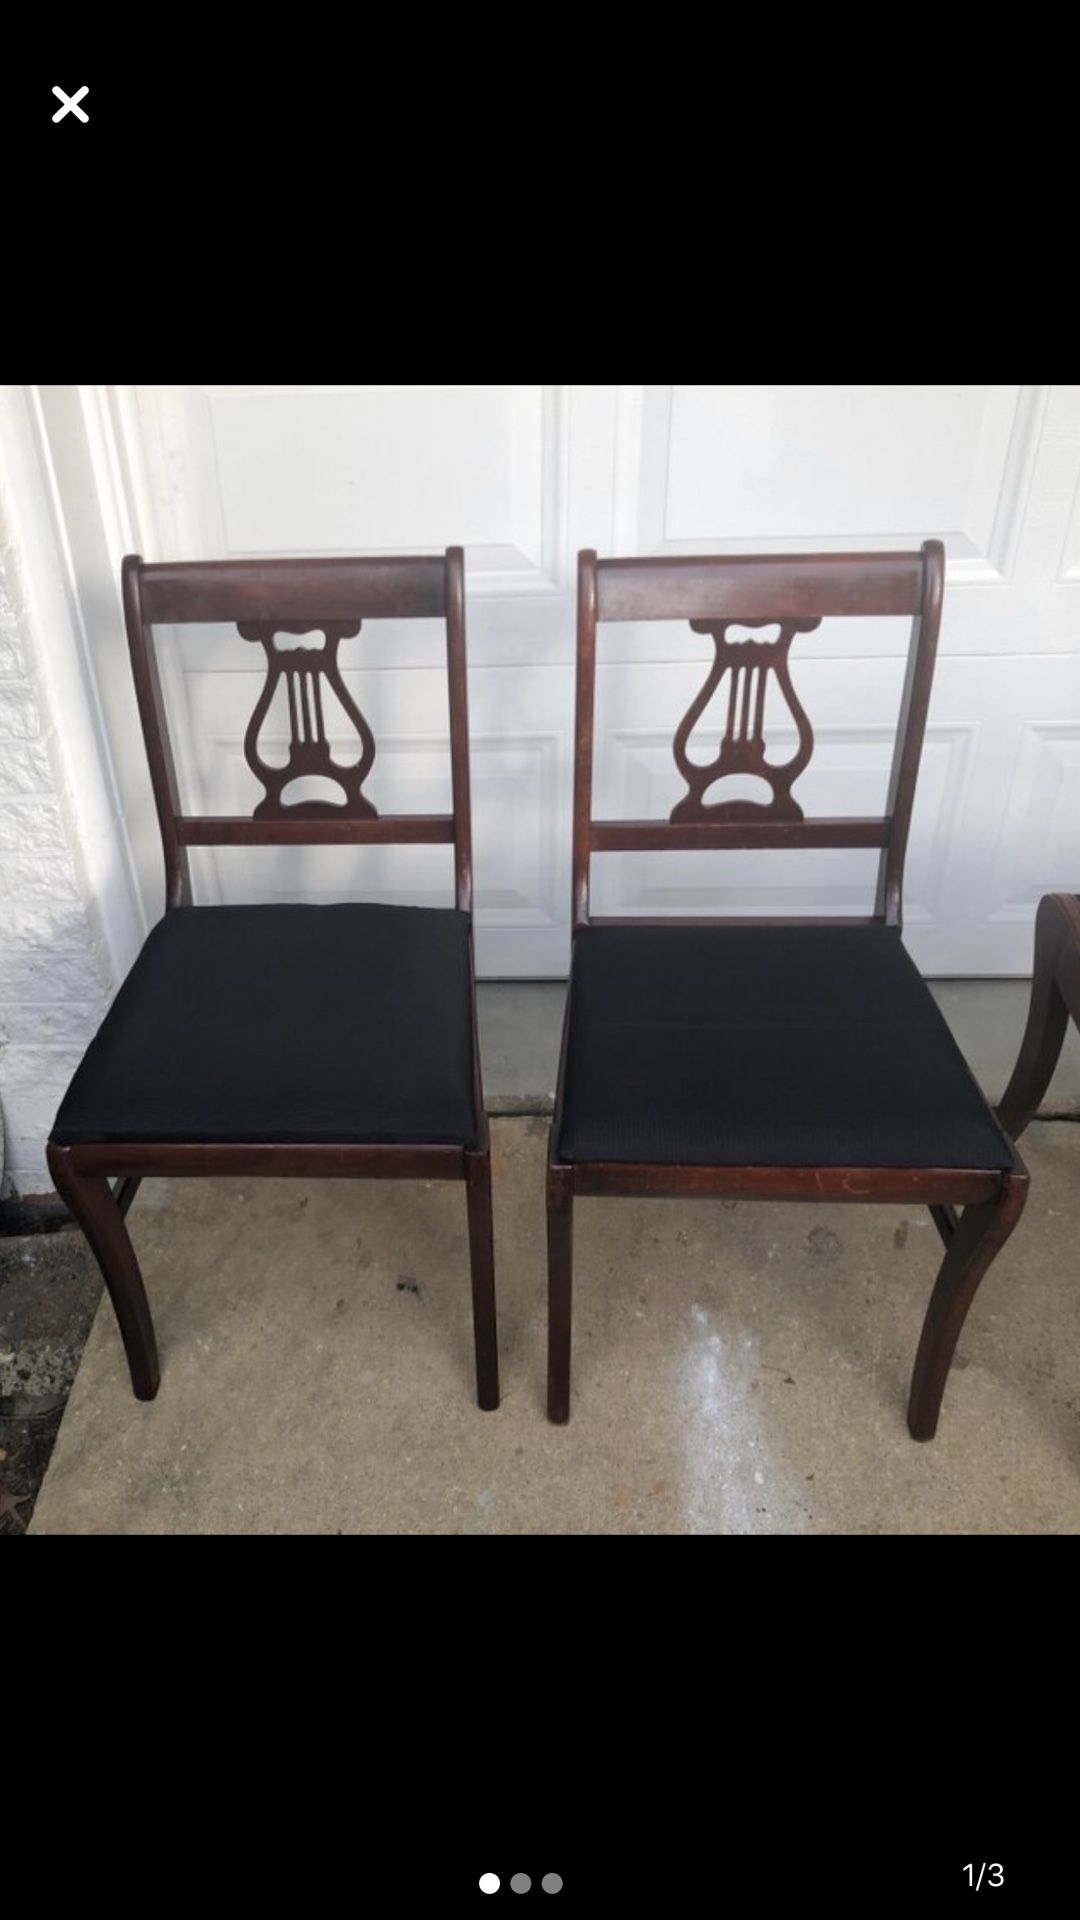 Two black and wooden antique chairs